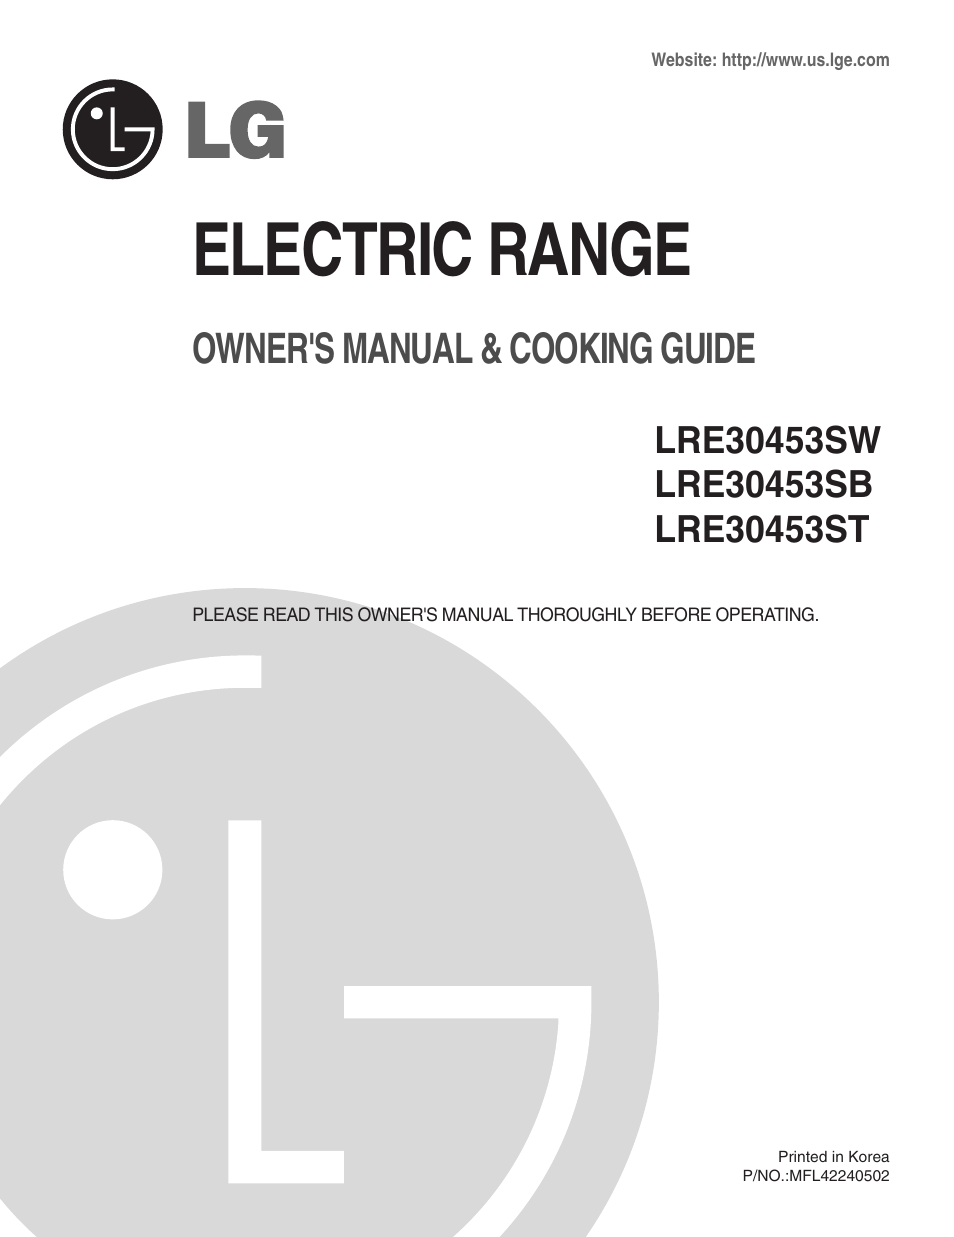 LG LRE30453SB User Manual | 36 pages | Also for: LRE30453SW